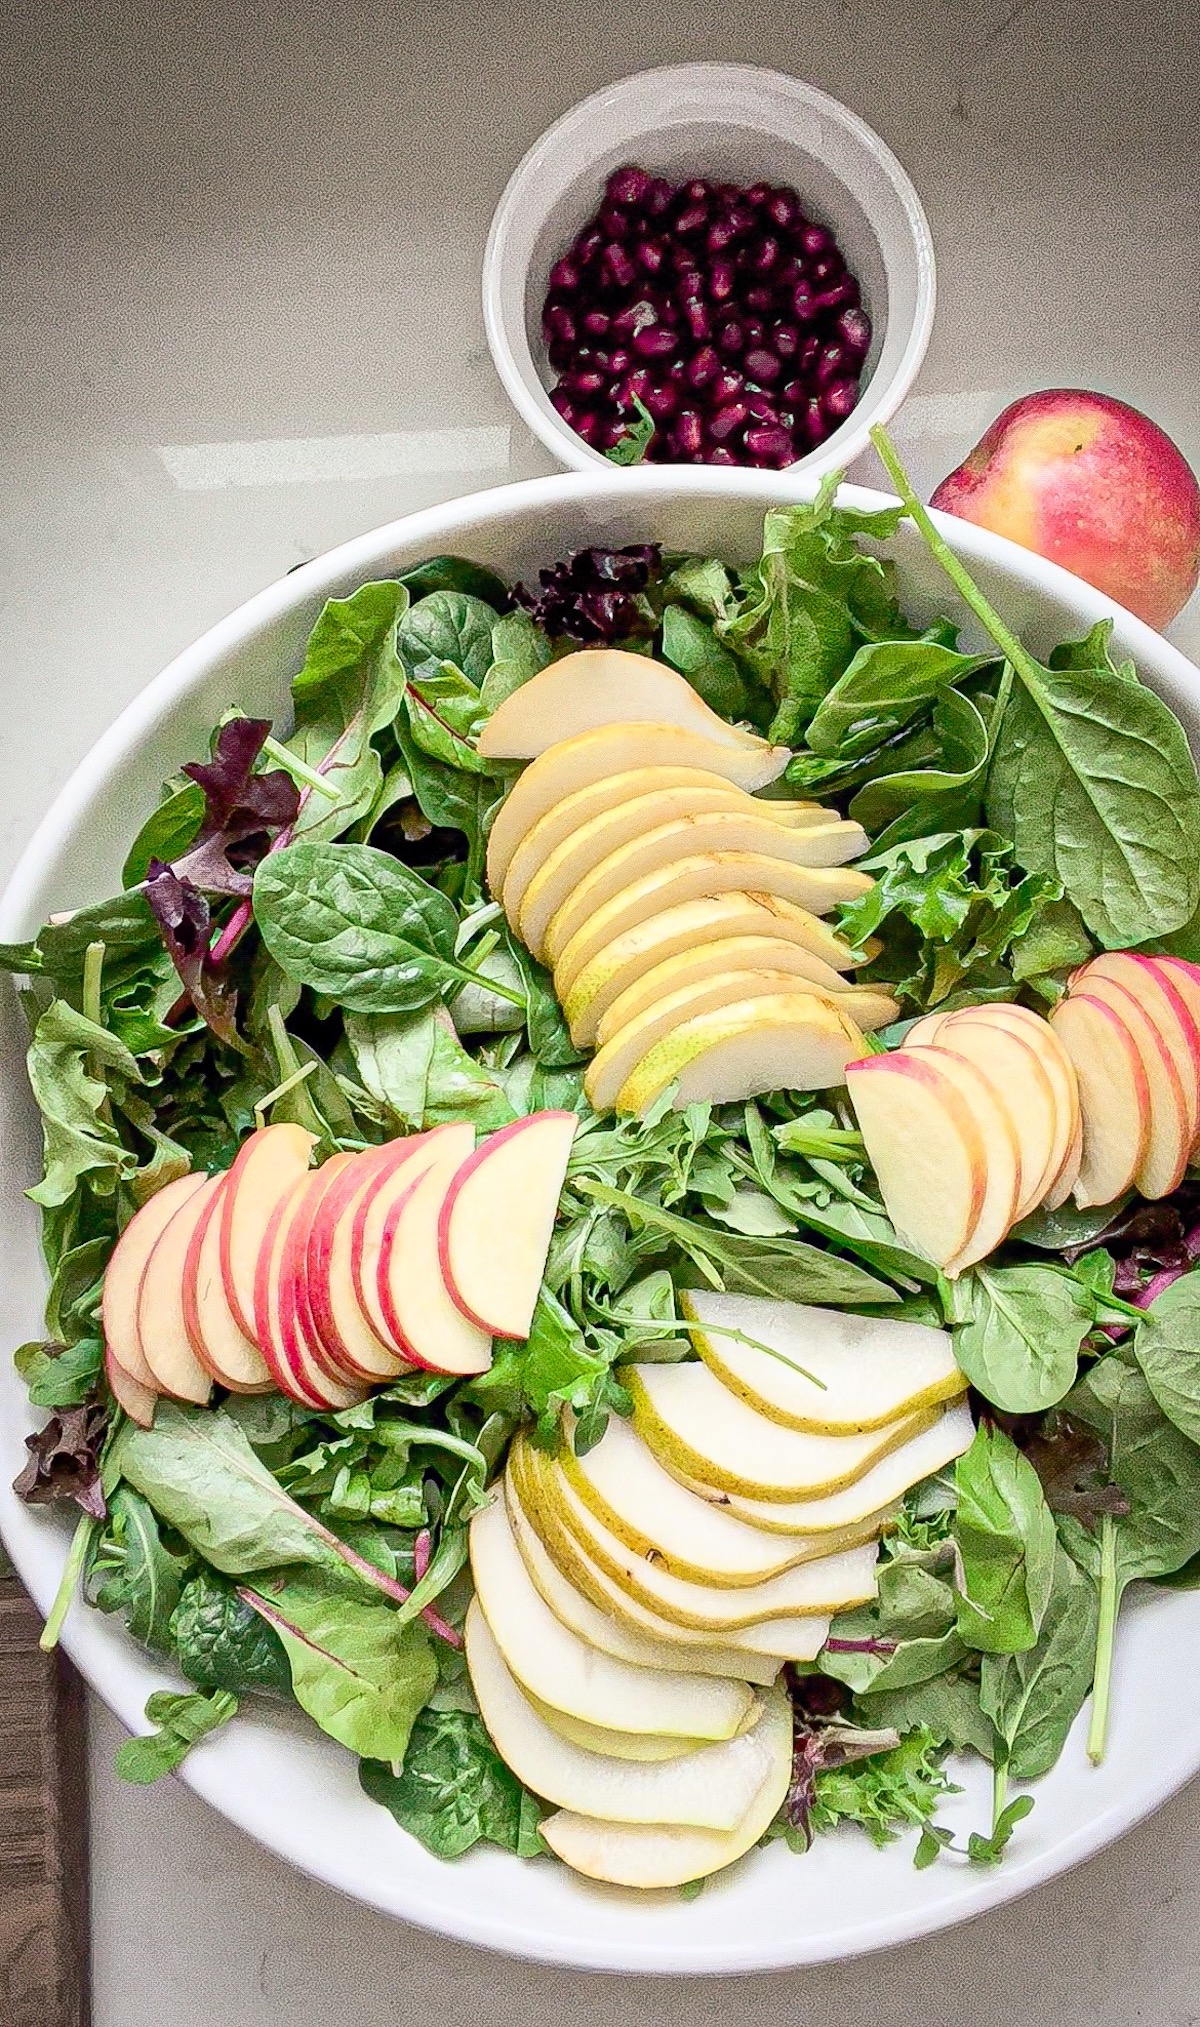 sliced fruit on top of mixed greens